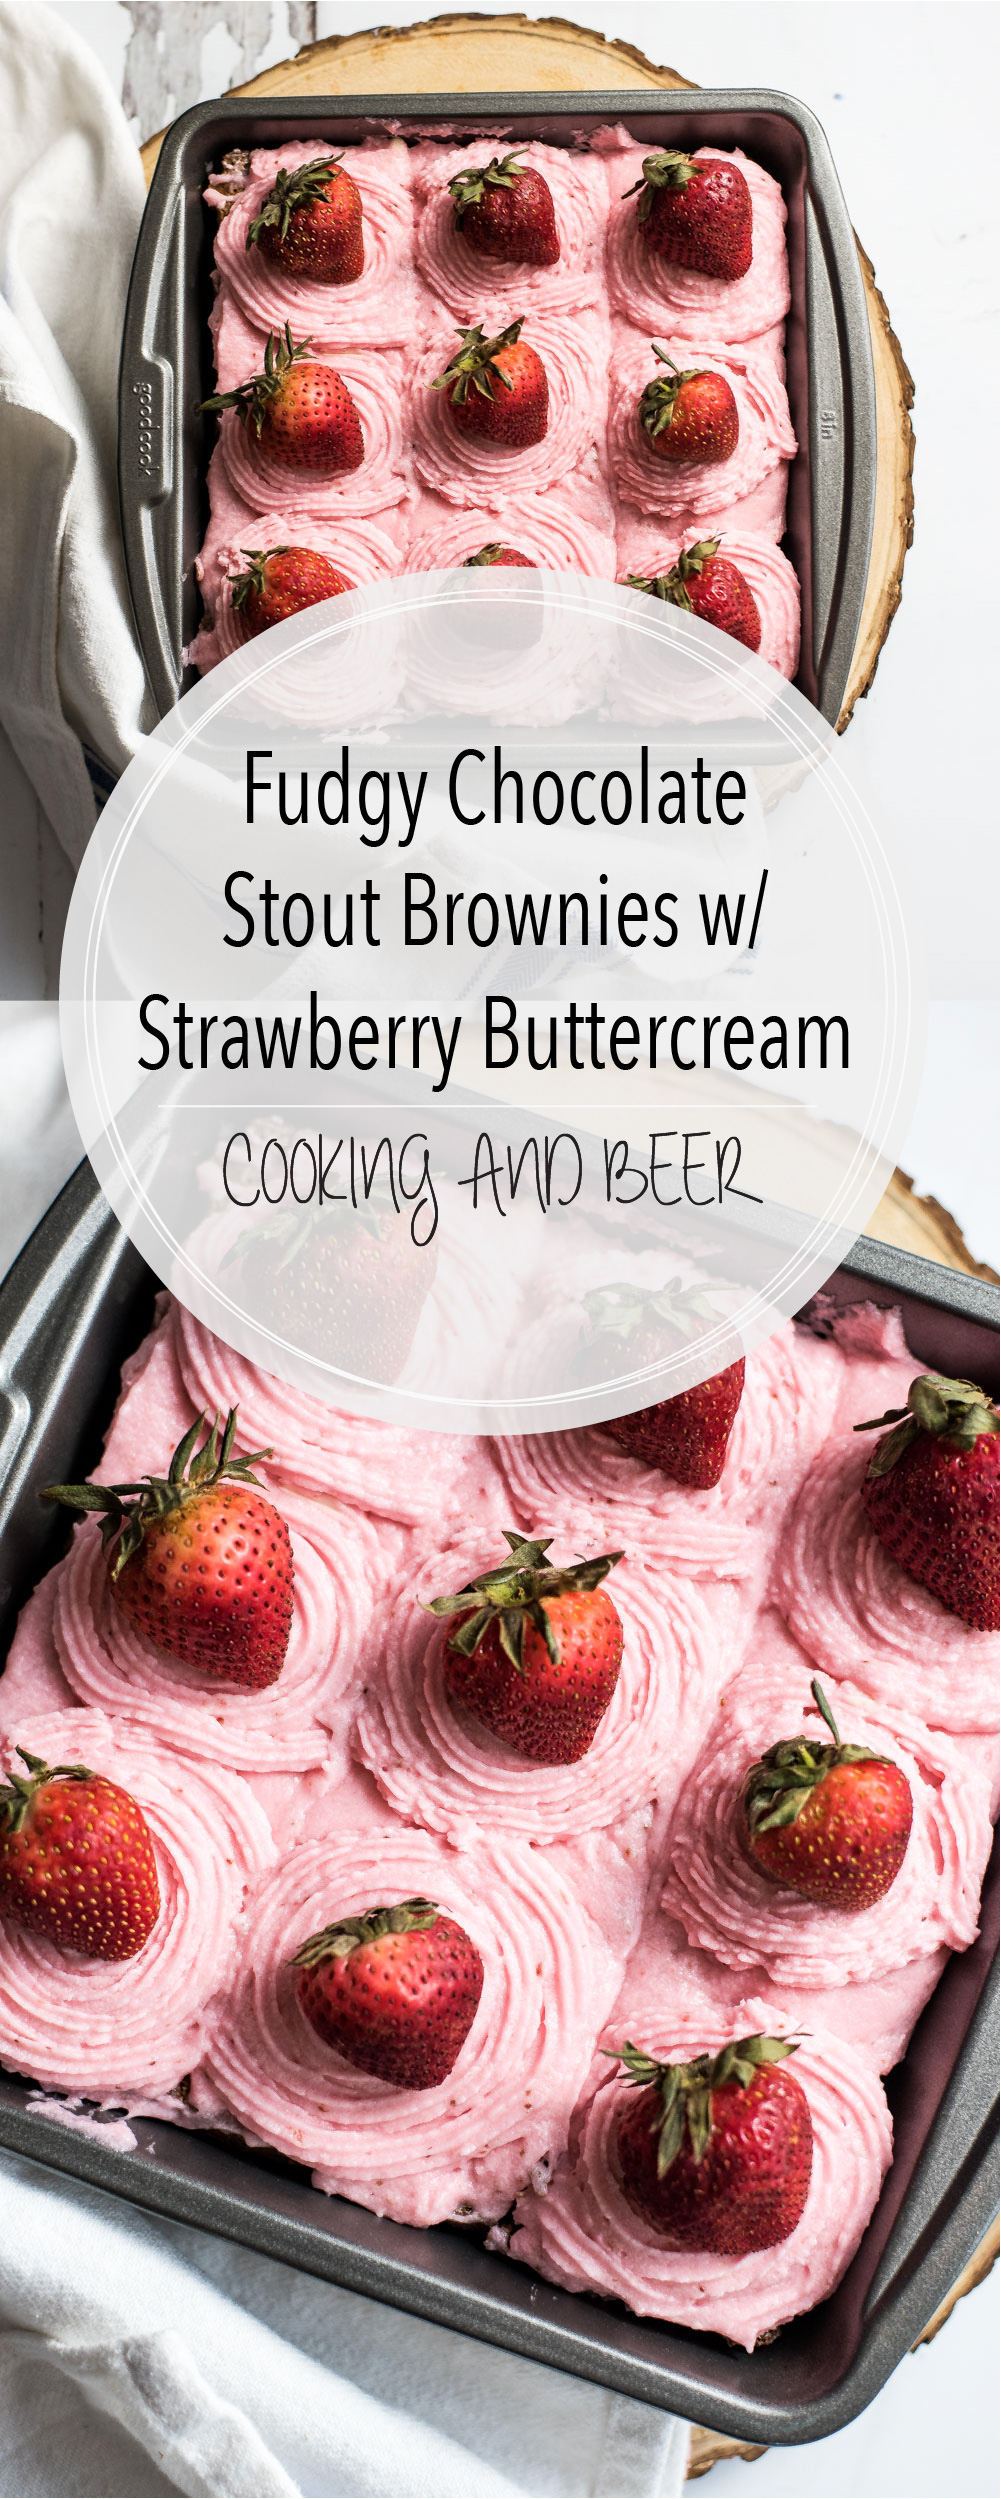 These Fudgy Chocolate Stout Brownies with Strawberry Buttercream are the perfect spring treat. They are bursting with strawberry flavor!